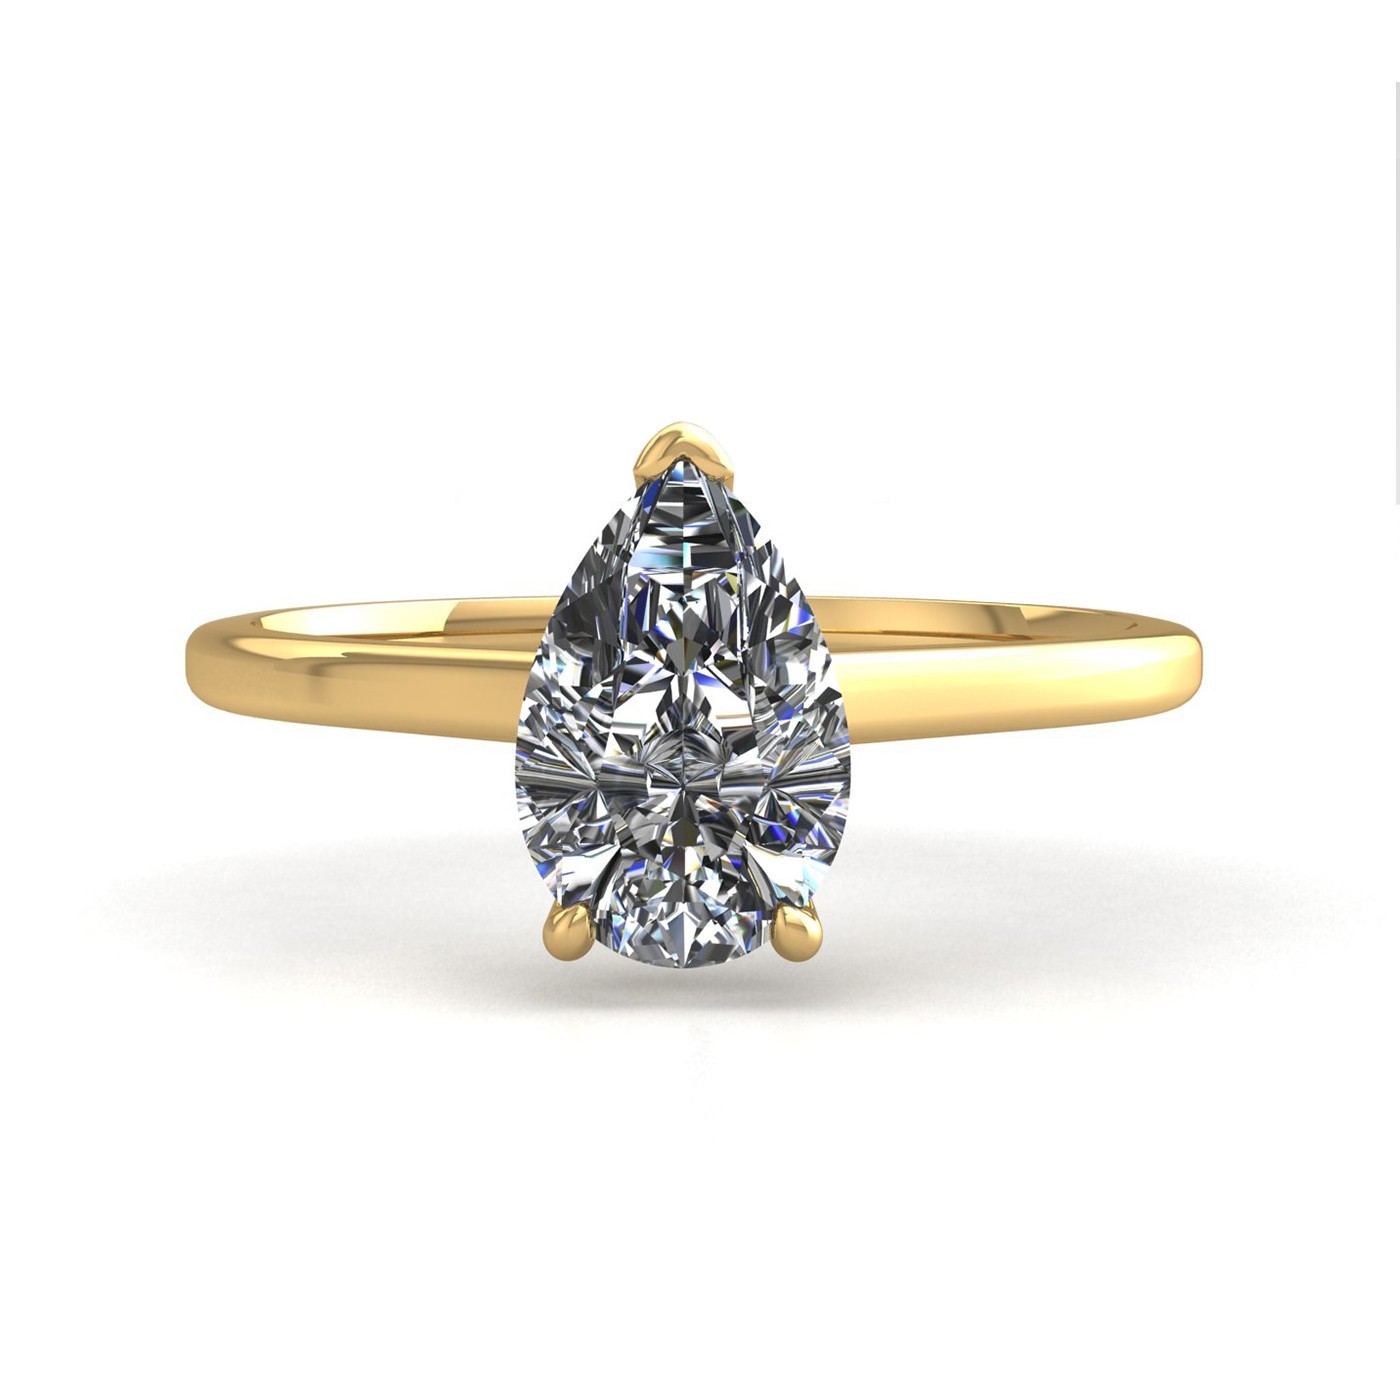 18k yellow gold  0,80 ct 3 prongs solitaire pear cut diamond engagement ring with whisper thin band Photos & images